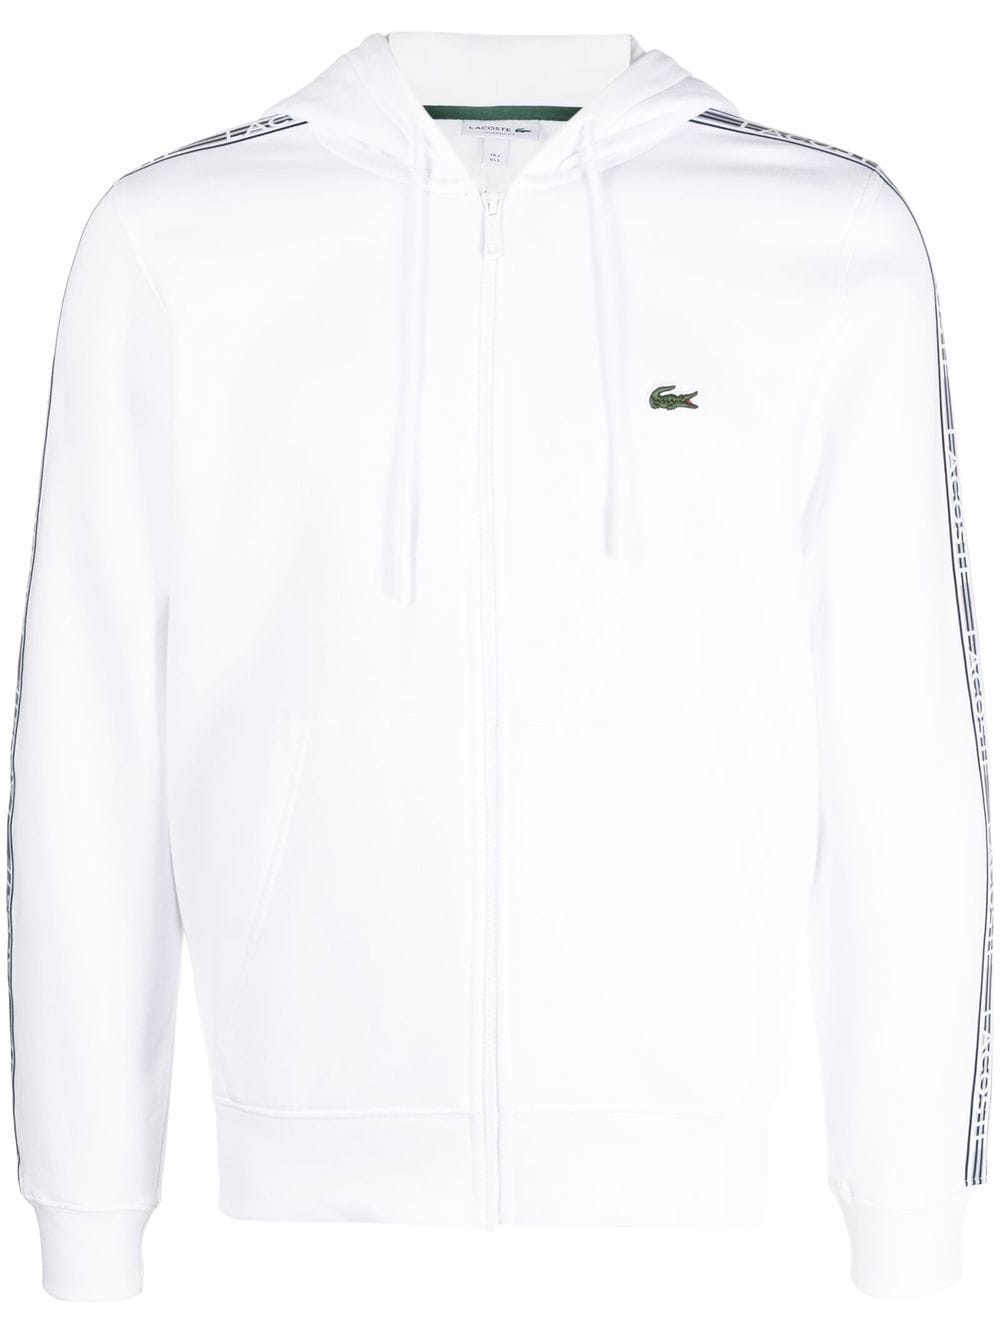 Lacoste zipped-up drawstring hoodie - White von Lacoste